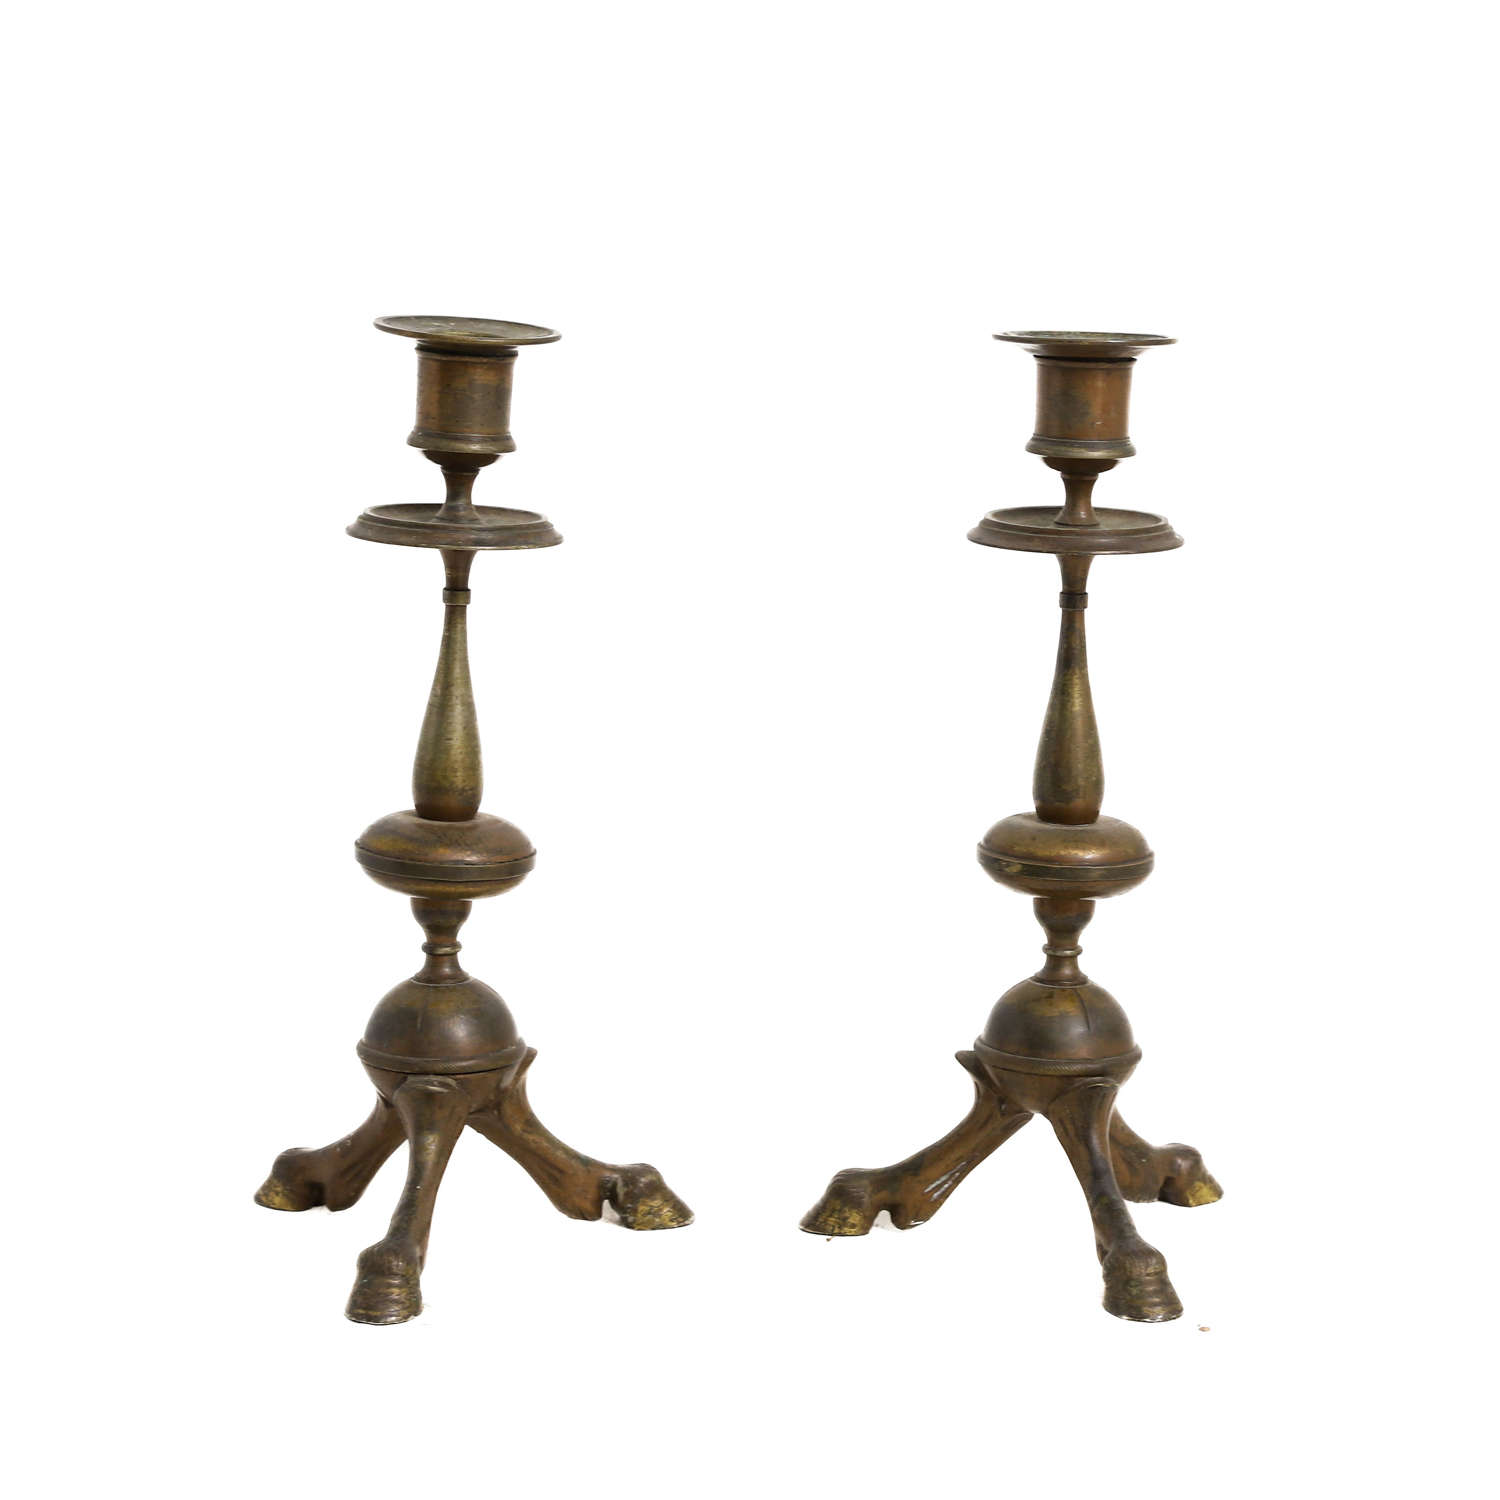 Pied-de-biche or Hoof Foot Candlesticks - French c1890 good patination